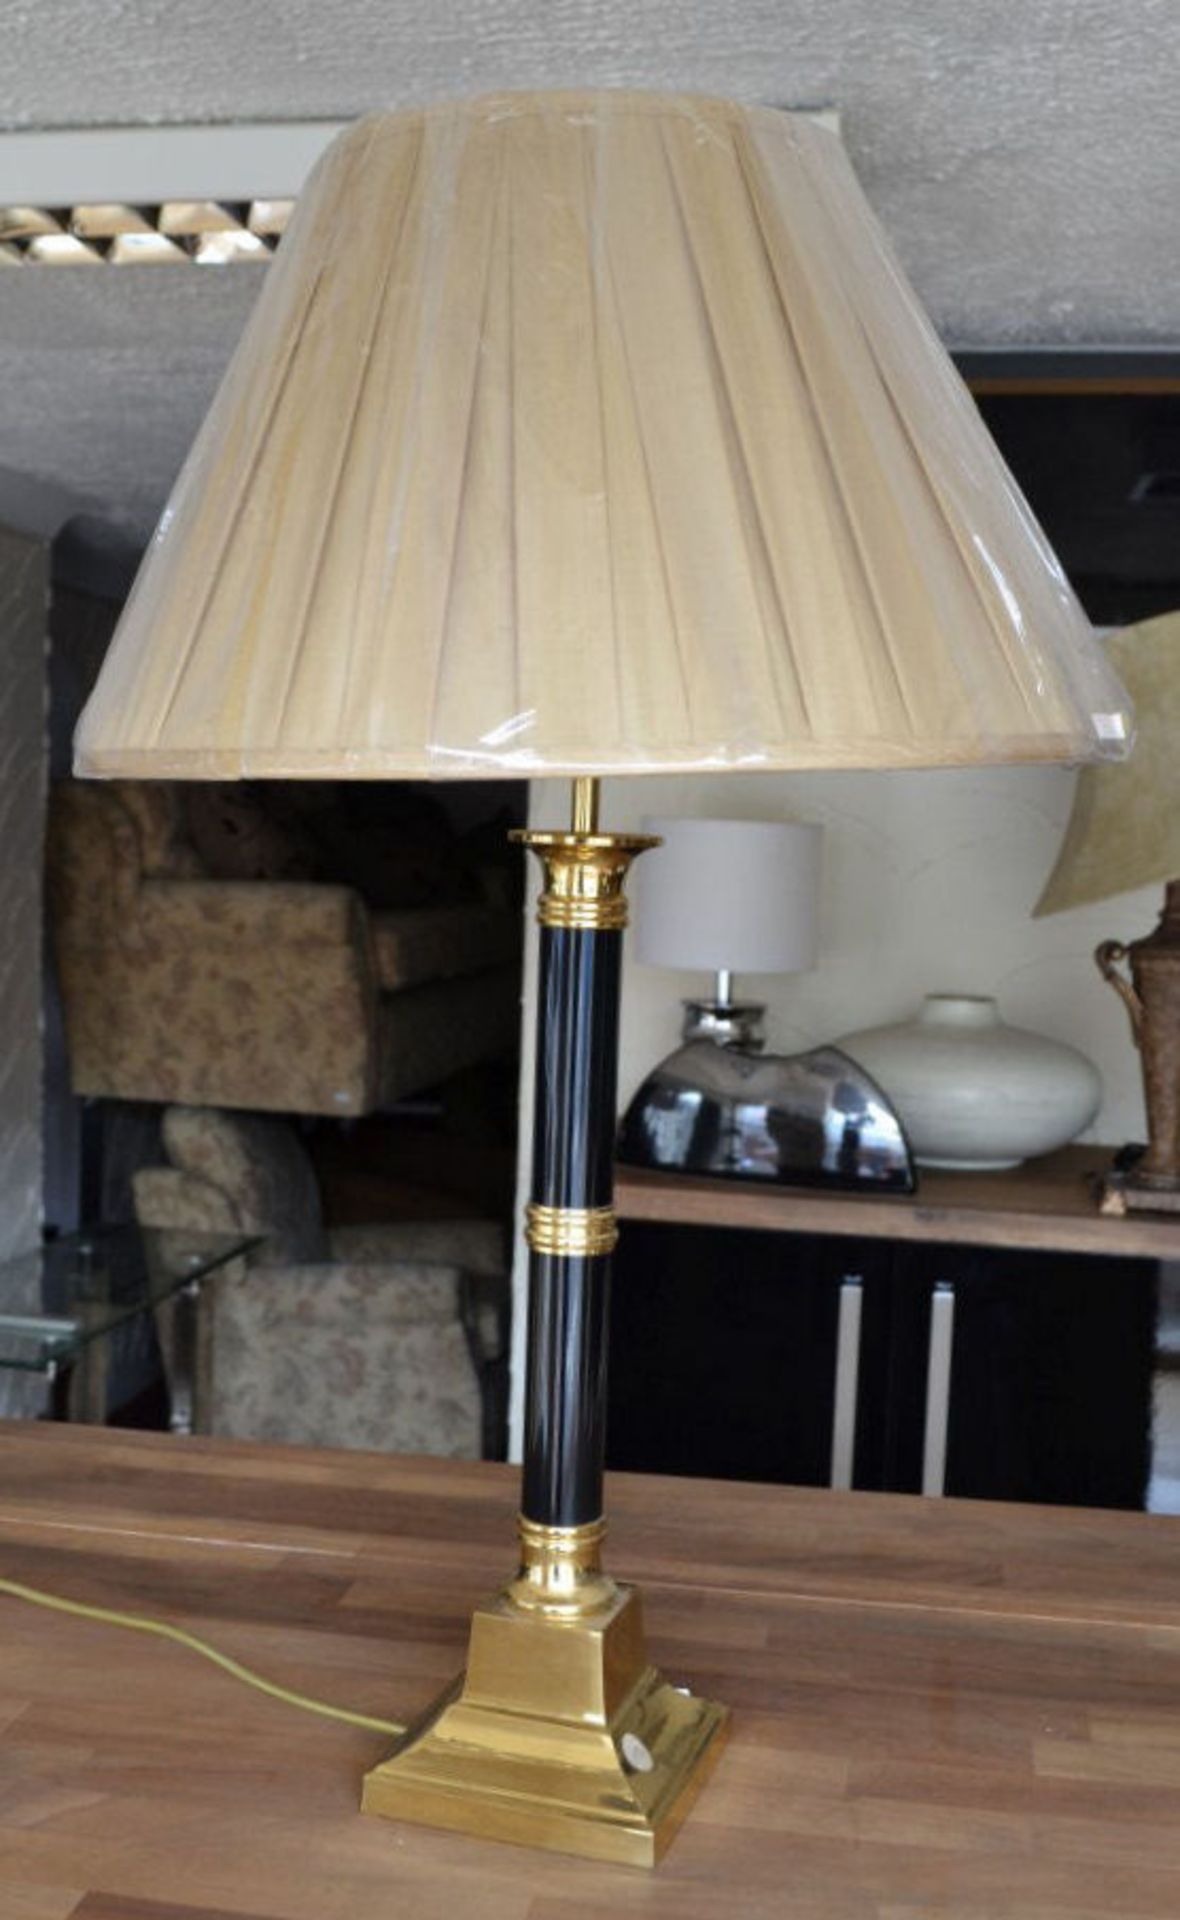 1 x Classical Gold And Black Column Lamp With Cream Shade - Image 3 of 4